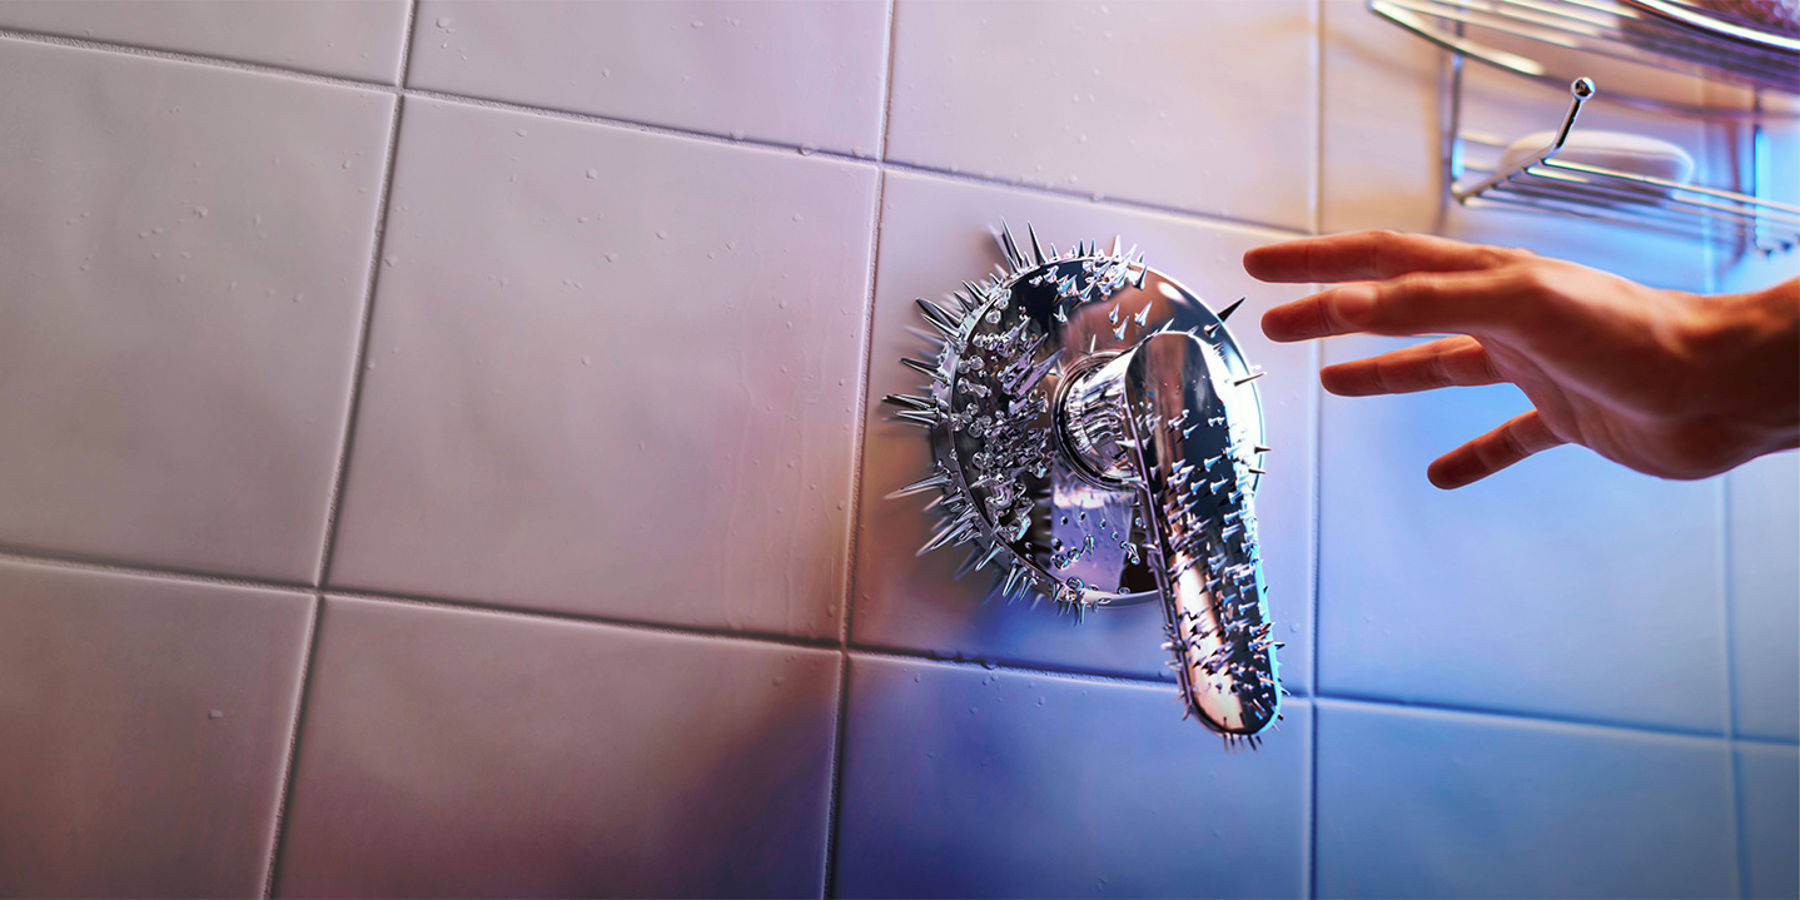 A hand about to touch a bathroom tap with spikes.